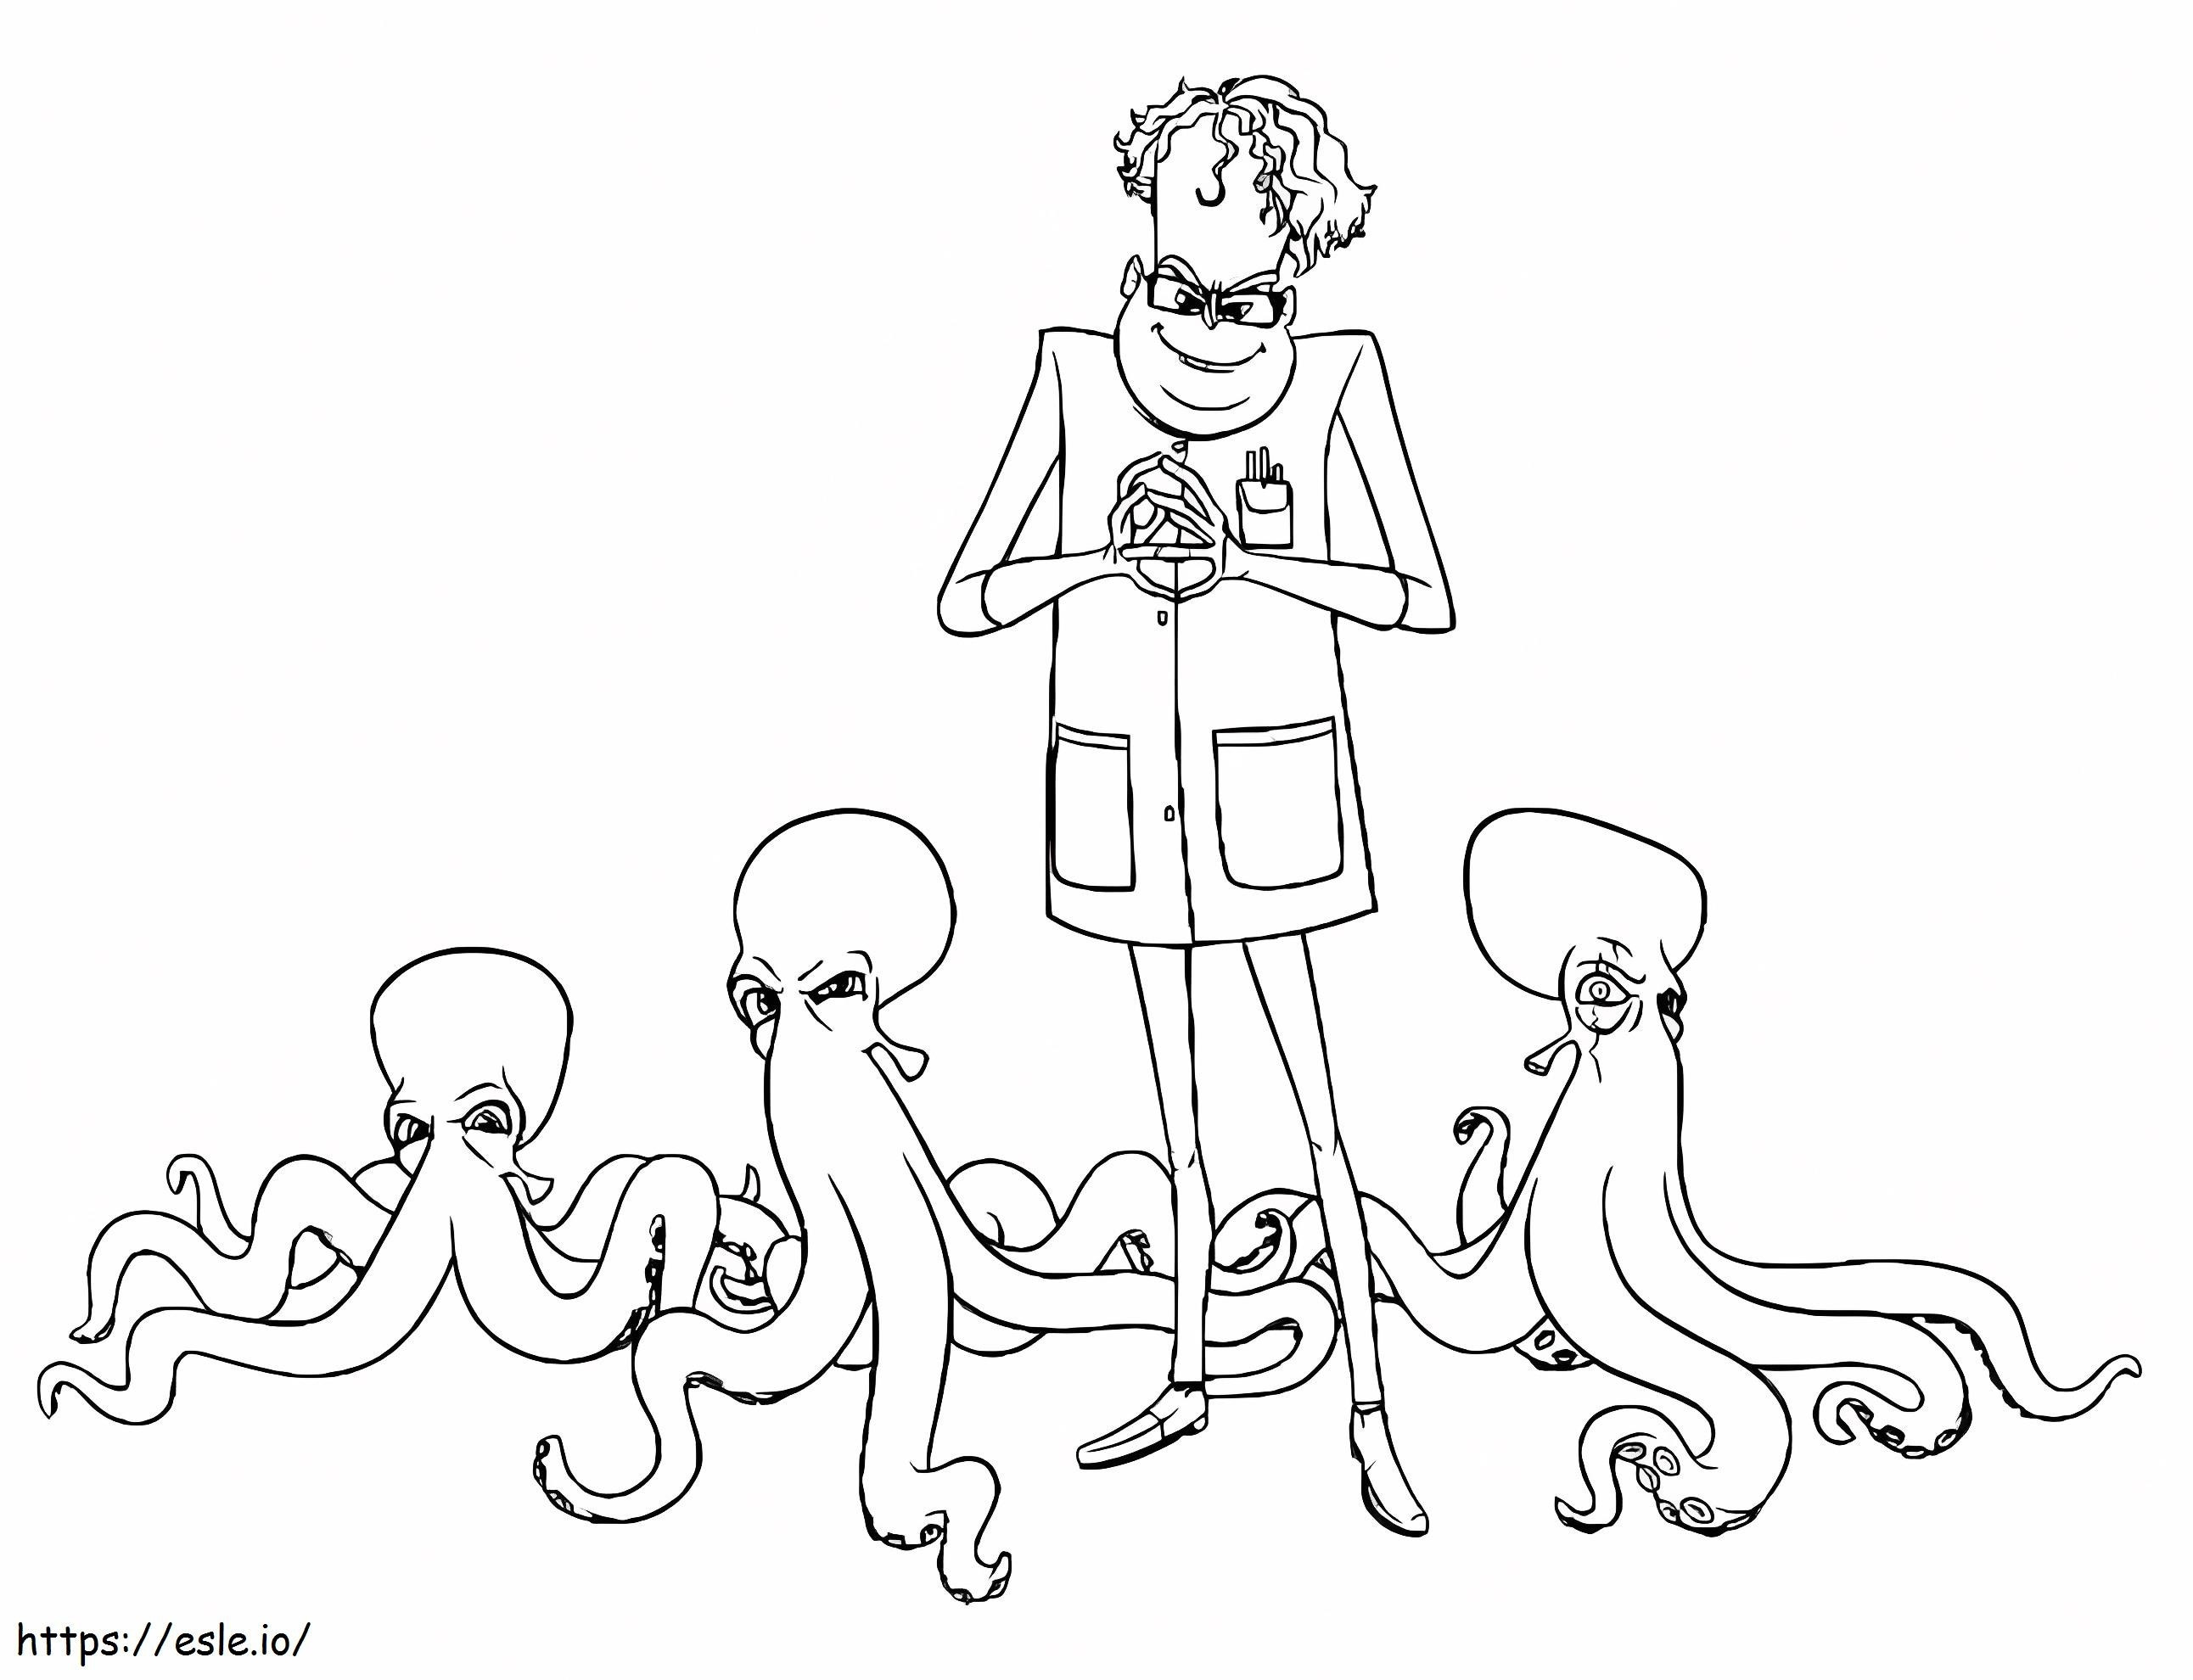 Dr. Octavius From Penguins Of Madagascar coloring page